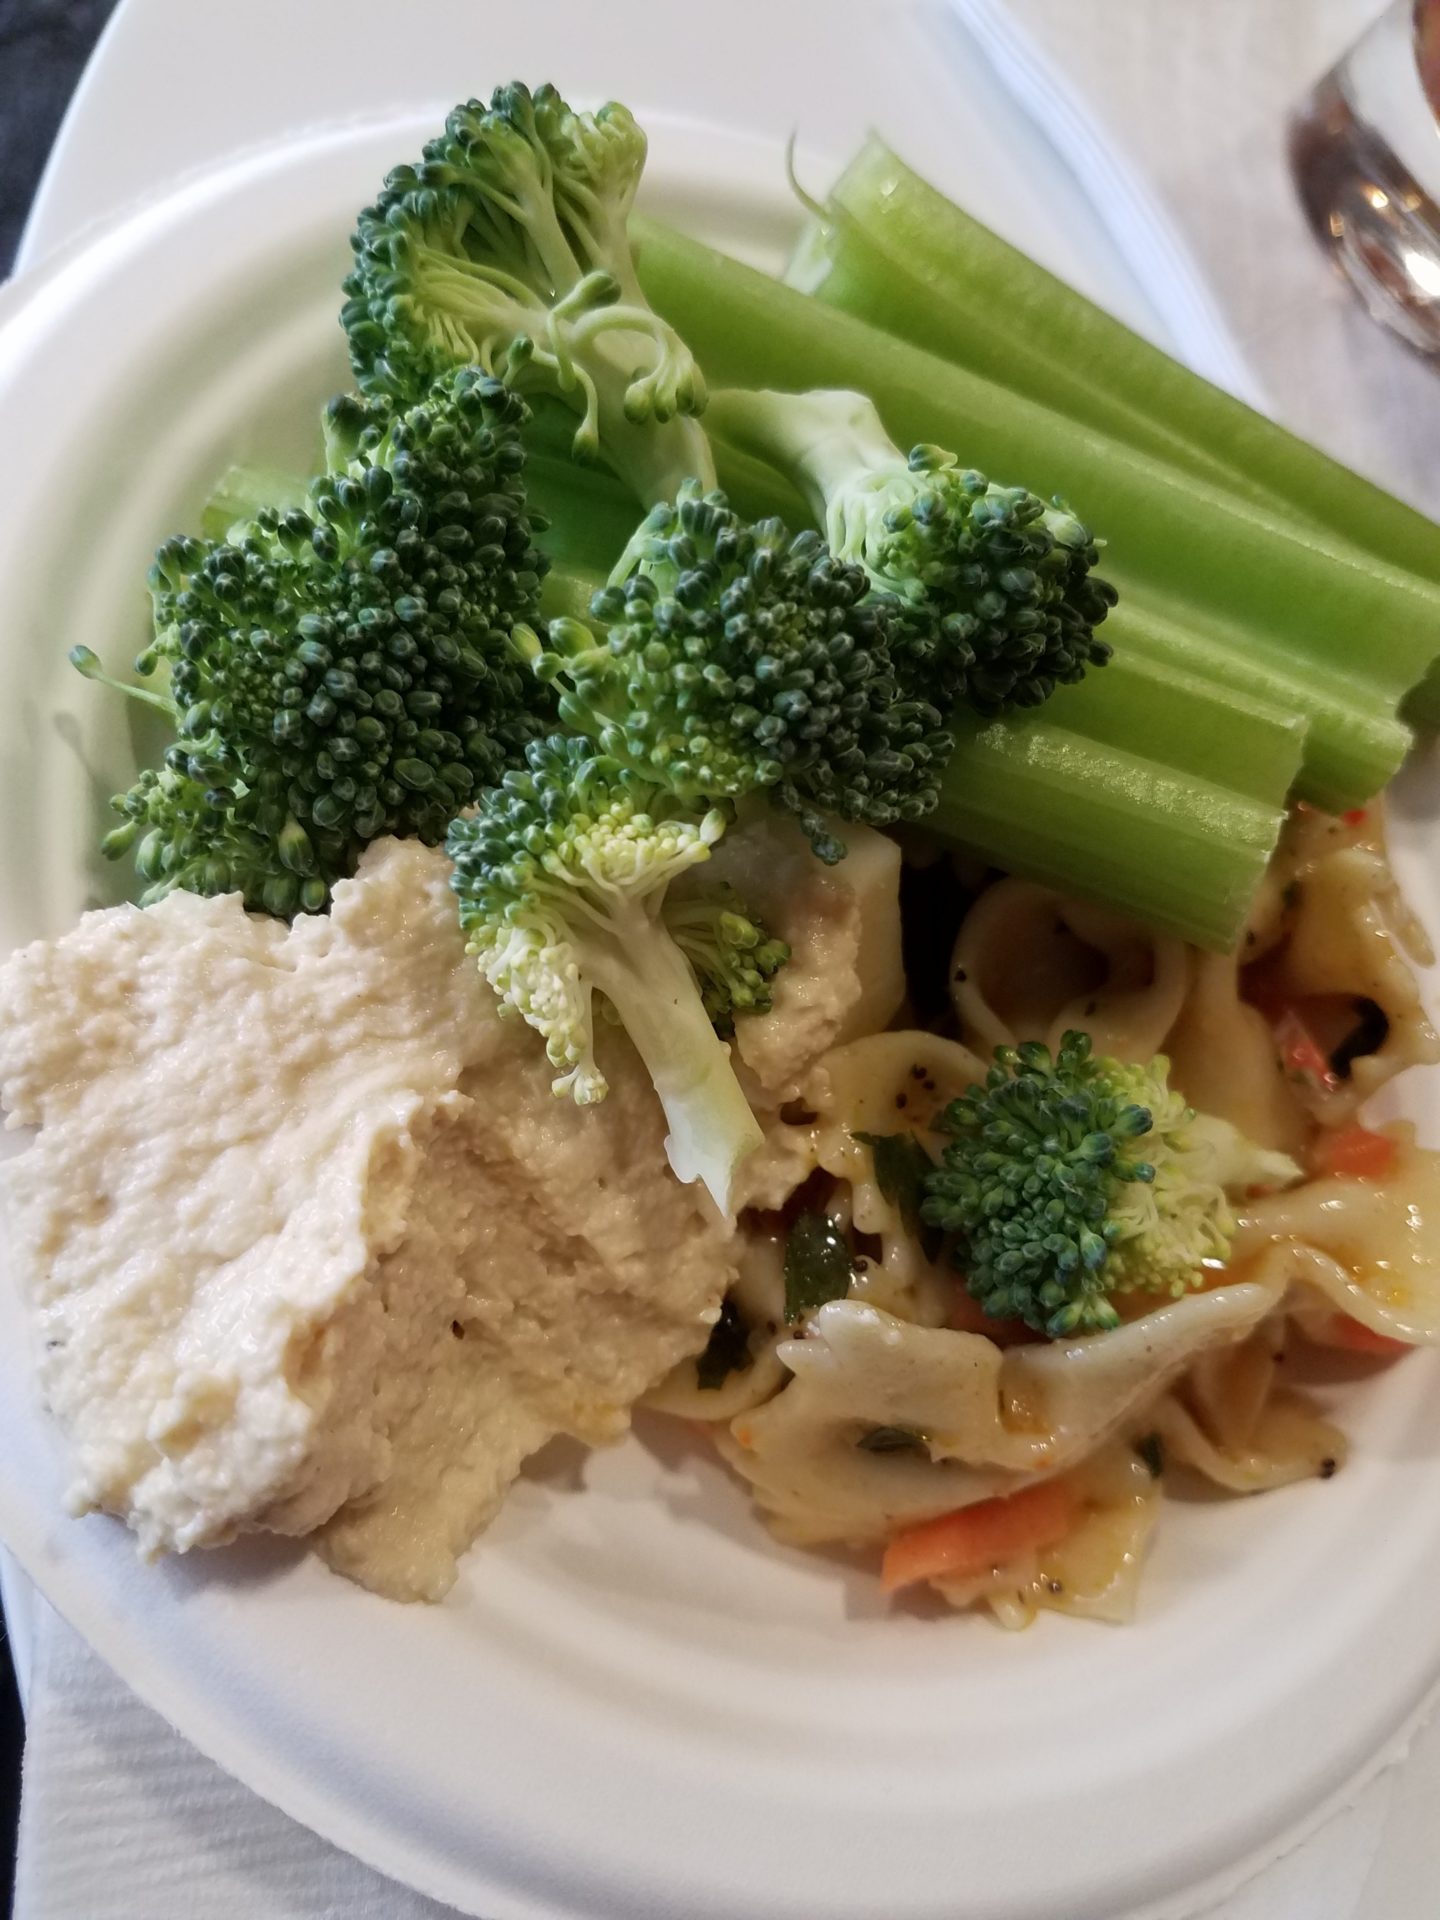 a plate of food with broccoli and pasta